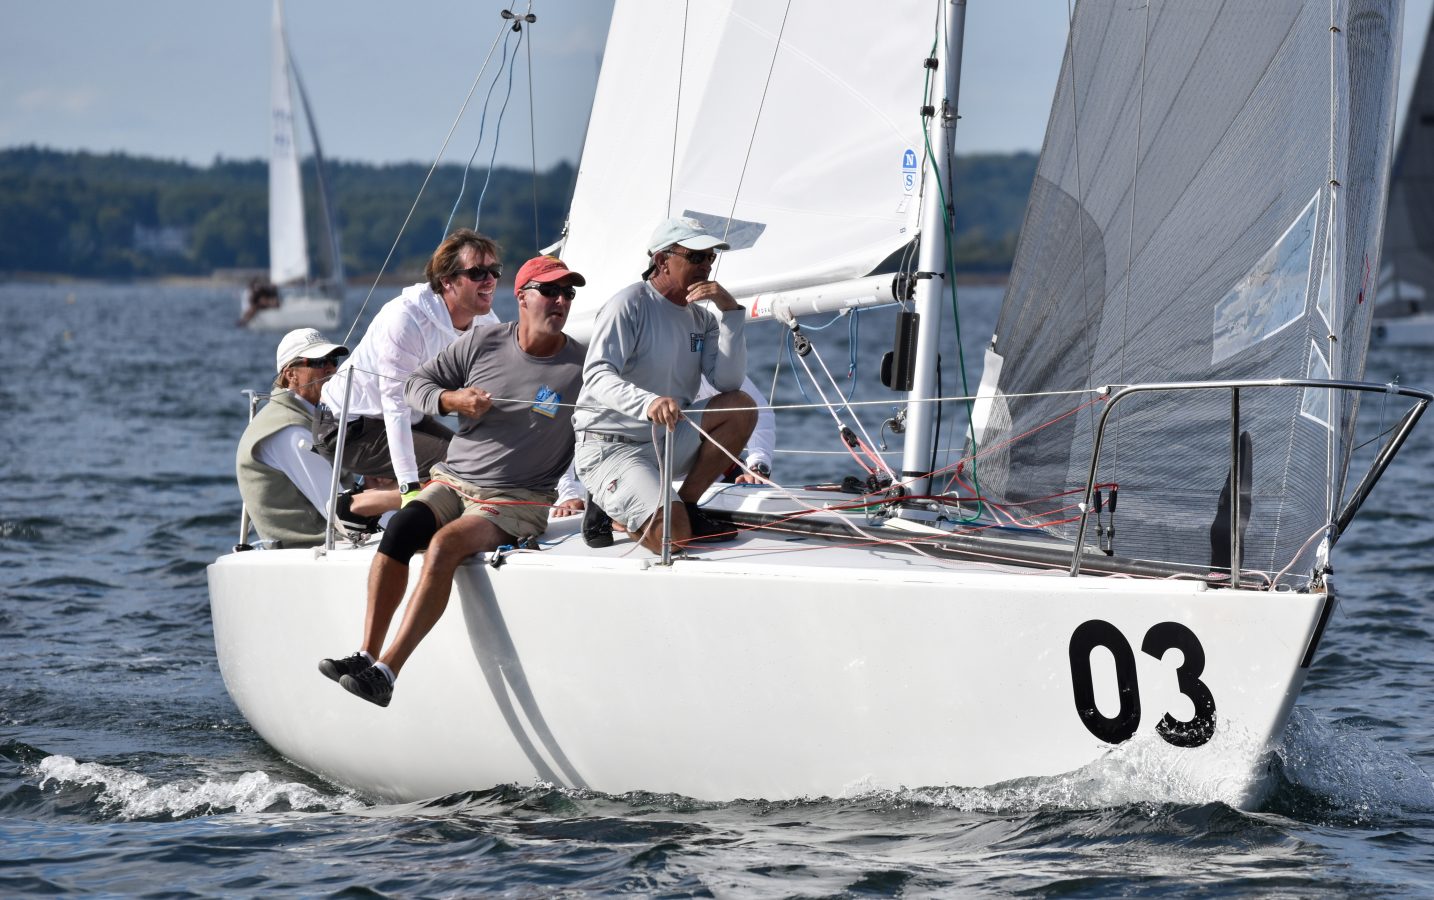 J/24 NATIONALS: MANAGING STRONG CURRENTS & LIGHT AIR